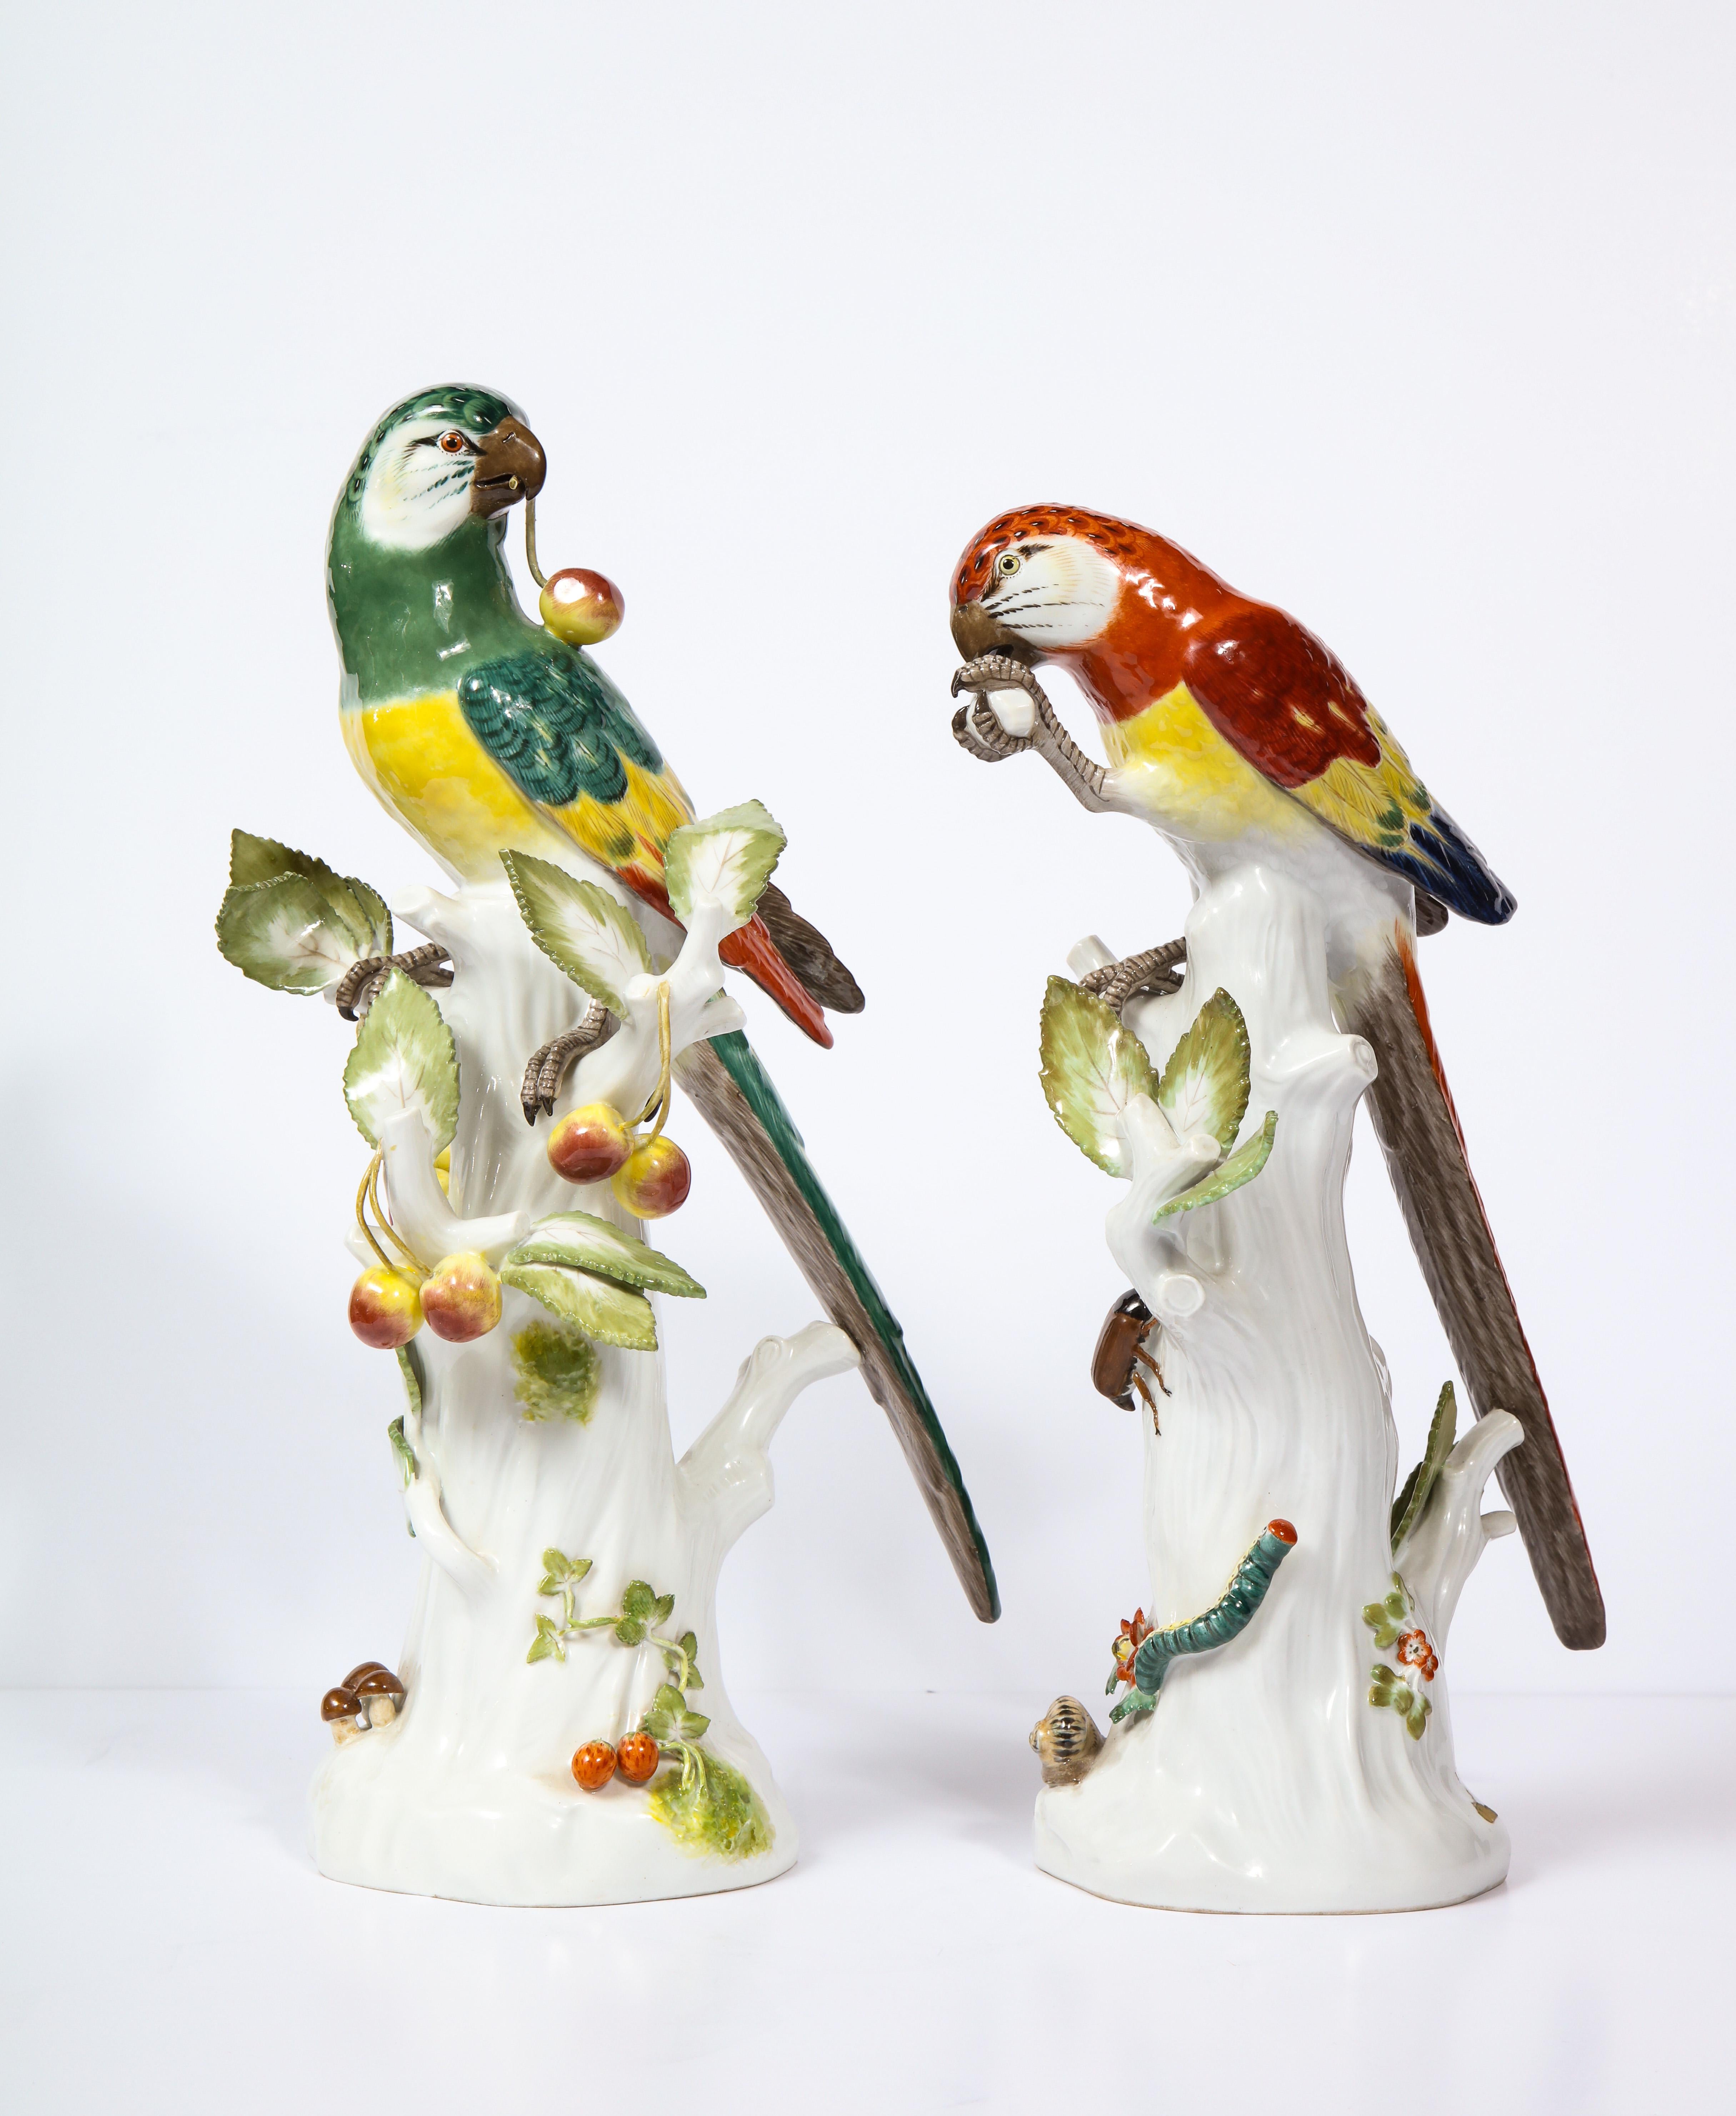 Rococo Pair of Meissen Porcelain Figures of Parrots with Cherries, Insects and Flowers